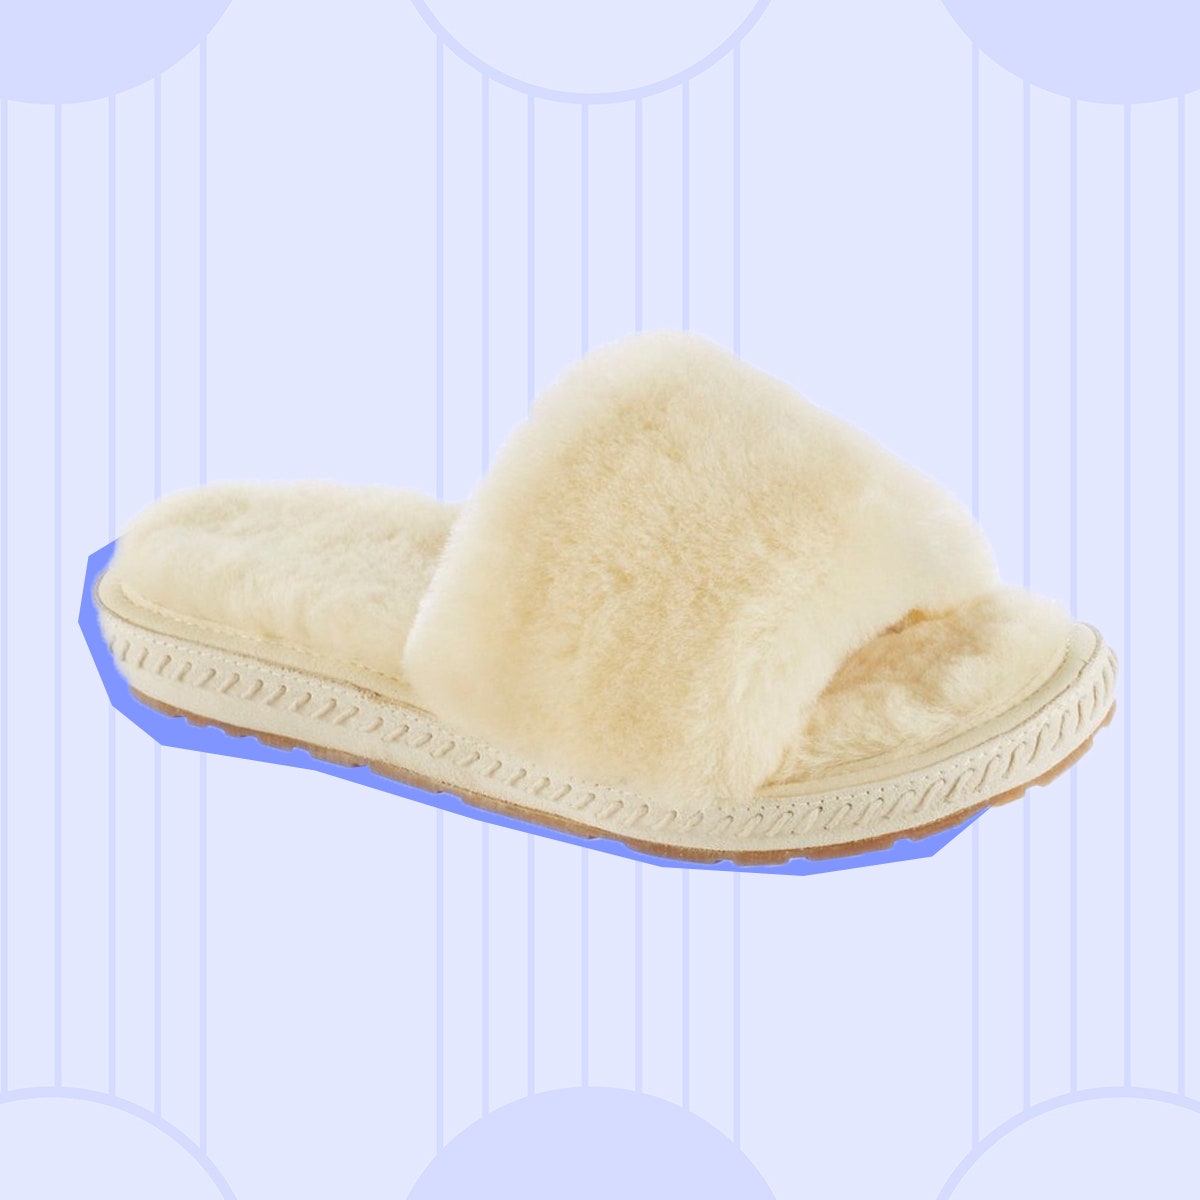 27 Easiest Slippers for Ladies folk in 2020: Fleece, Faux Fur, Shearling, and Extra